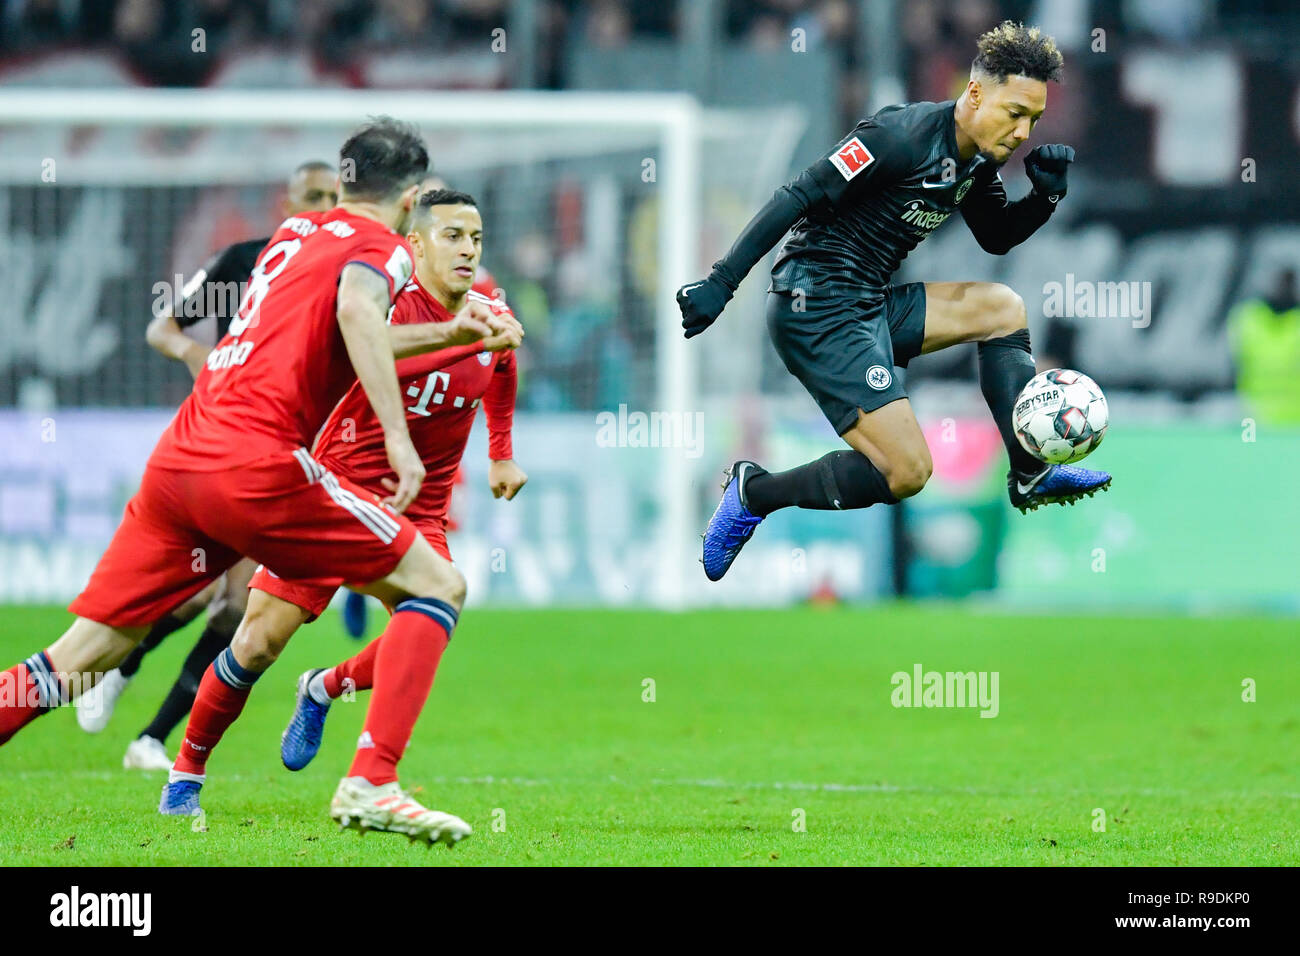 Frankfurt, Germany. 22nd Dec 2018.  Soccer: Bundesliga, Eintracht Frankfurt - FC Bayern Munich, 17th matchday, in the Commerzbank Arena. Frankfurt's Jonathan de Guzman (r) plays the ball. Photo: Uwe Anspach/dpa - IMPORTANT NOTE: In accordance with the requirements of the DFL Deutsche Fußball Liga or the DFB Deutscher Fußball-Bund, it is prohibited to use or have used photographs taken in the stadium and/or the match in the form of sequence images and/or video-like photo sequences. Credit: dpa picture alliance/Alamy Live News Stock Photo